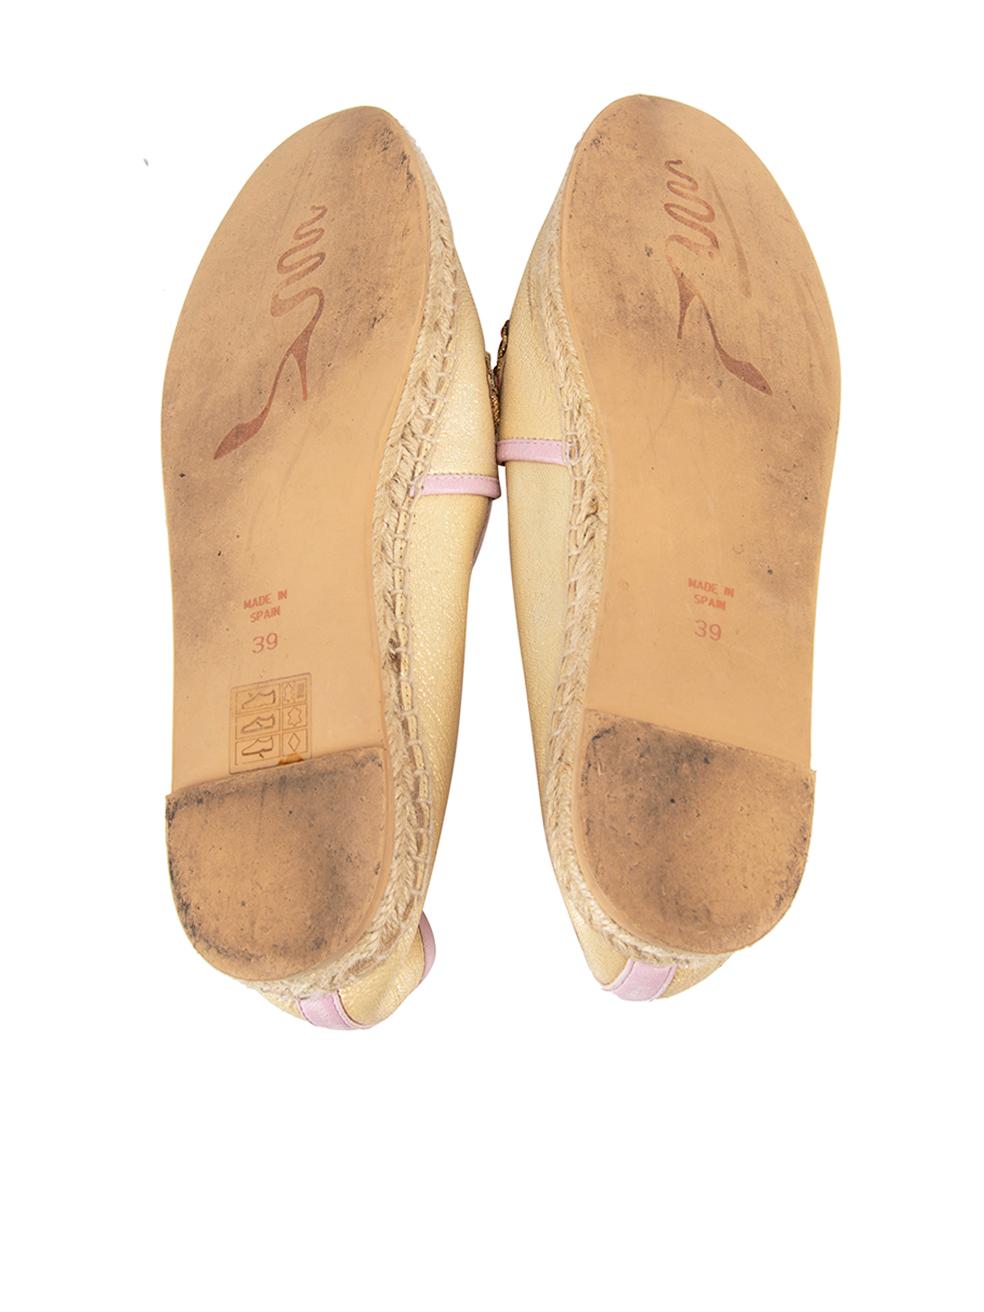 René Caovilla Gold Leather Jewelled Espadrilles Size IT 39 In Good Condition For Sale In London, GB